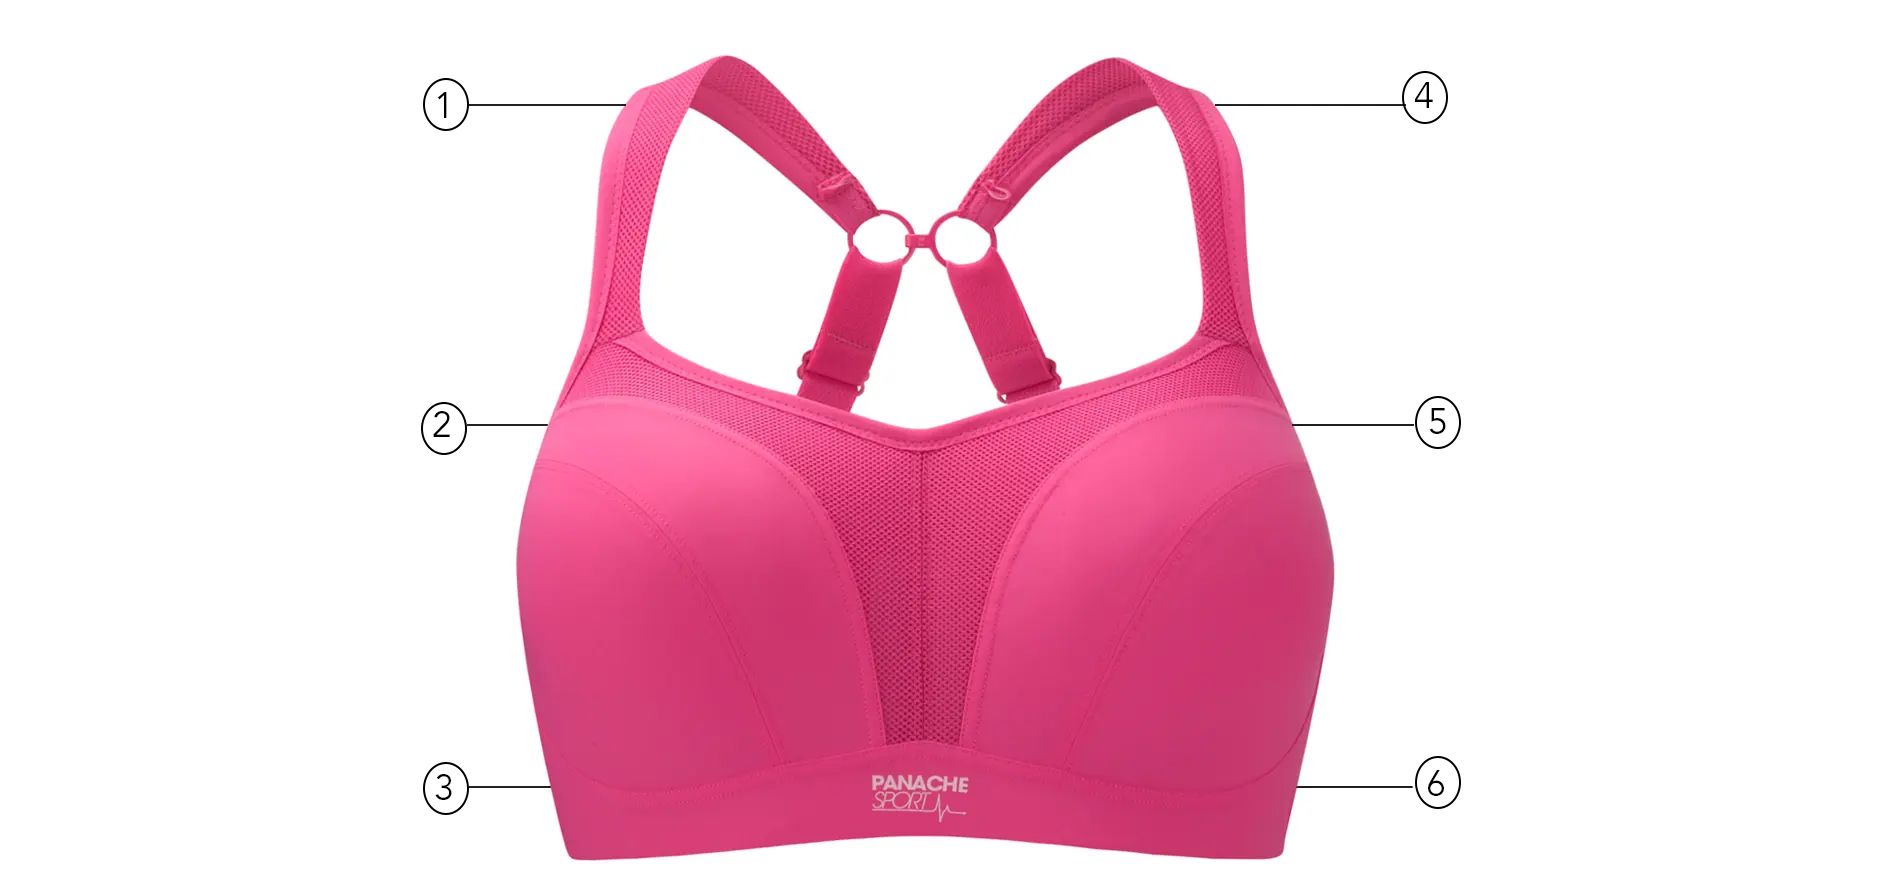 belle lingerie sports bra buying guide fitting advice